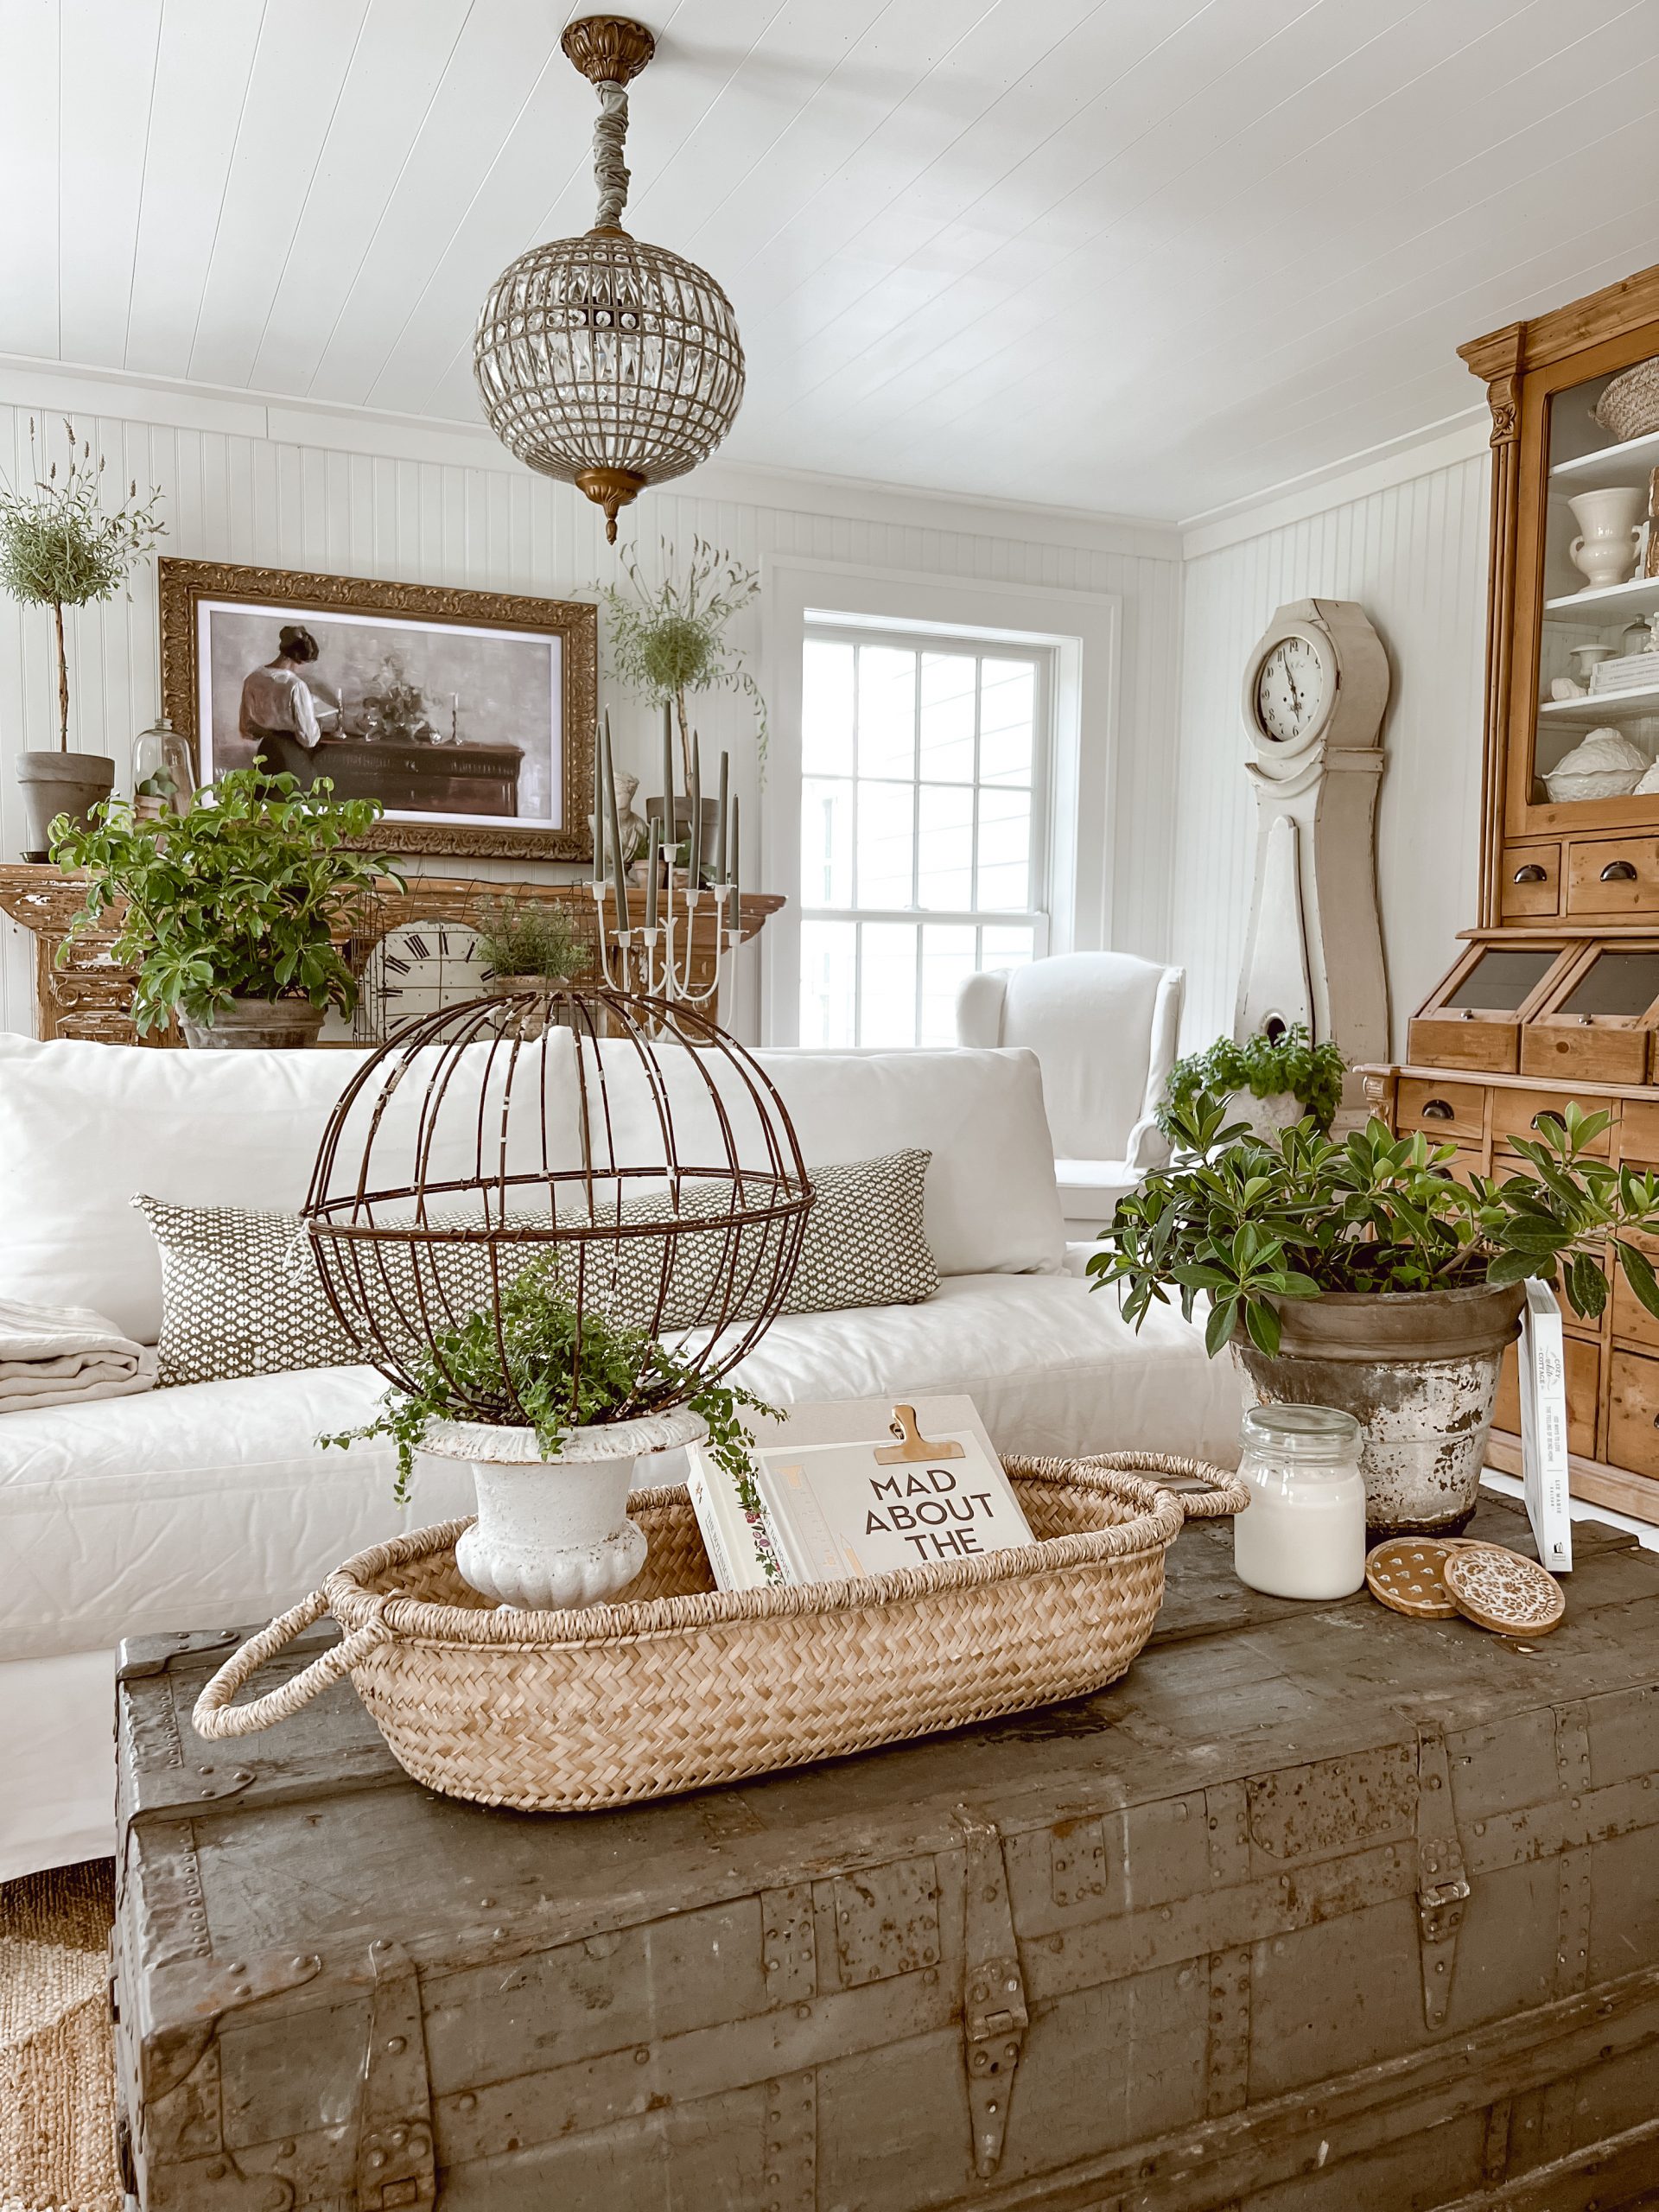 Favorite Things Friday: Weekend Antique Haul, Window Treatments Inspiration, & Cozy Summer Sandals